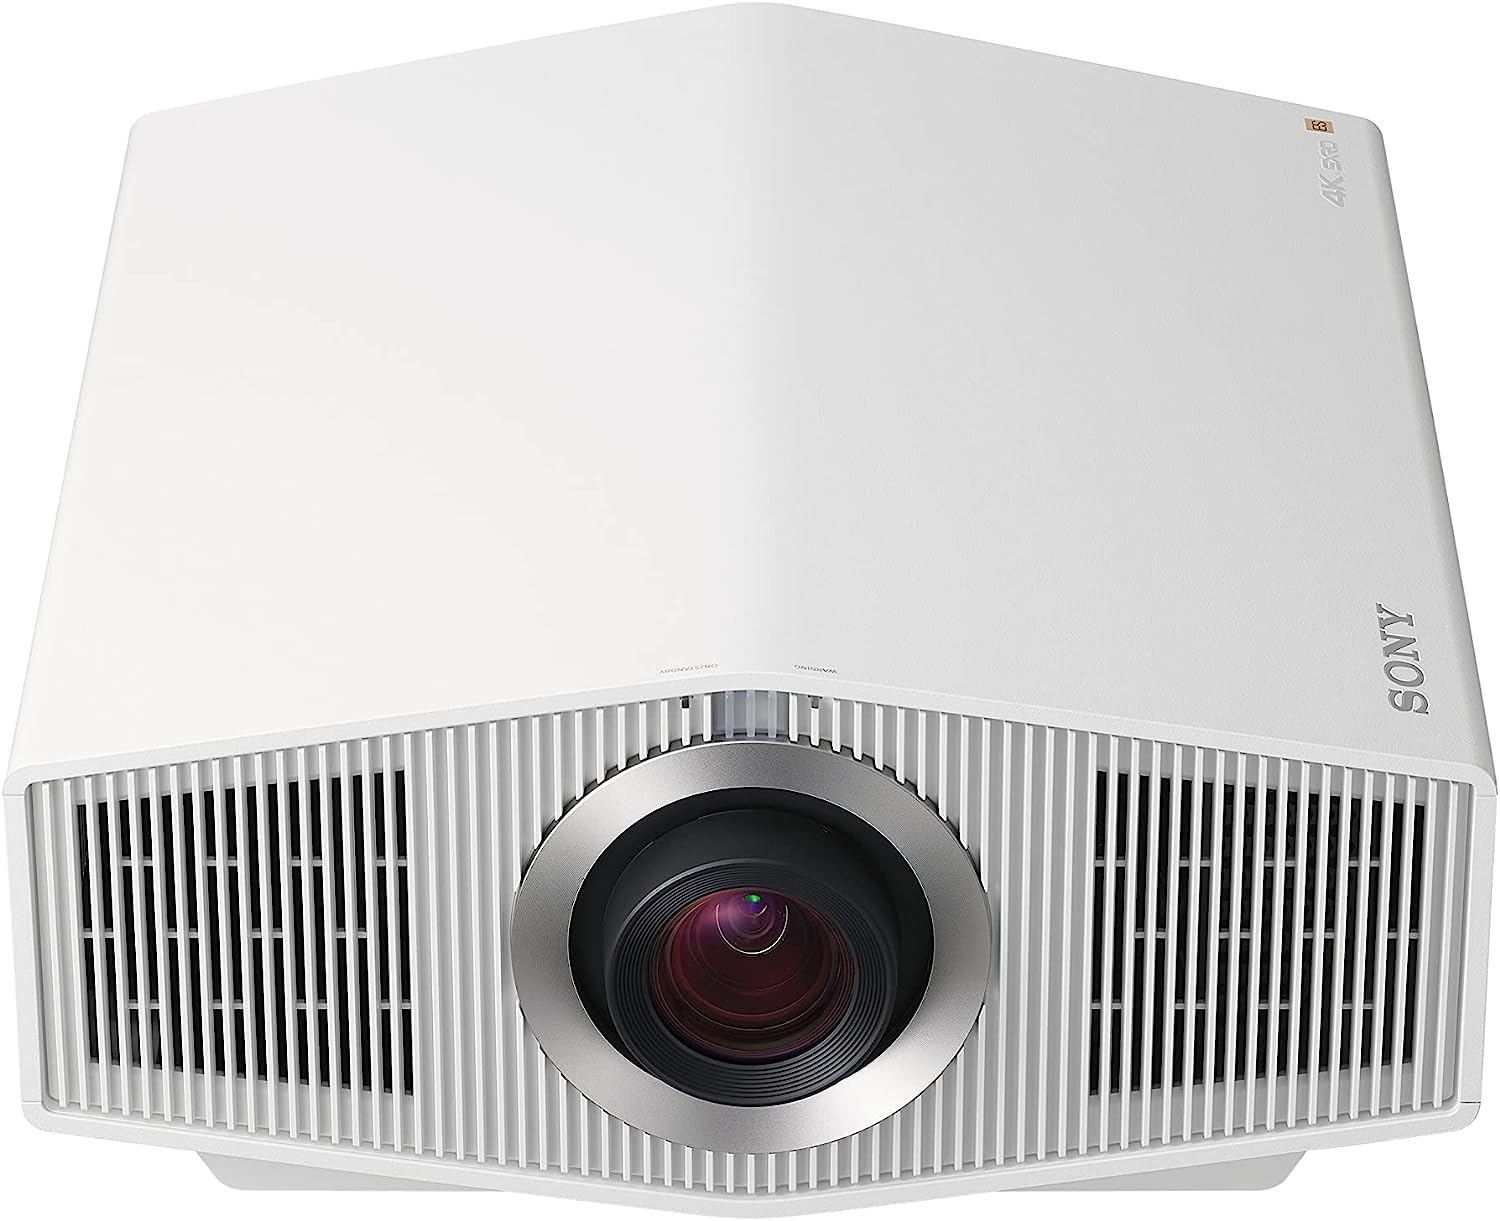 What makes the Sony VPL-XW6000ES projector a great buy?